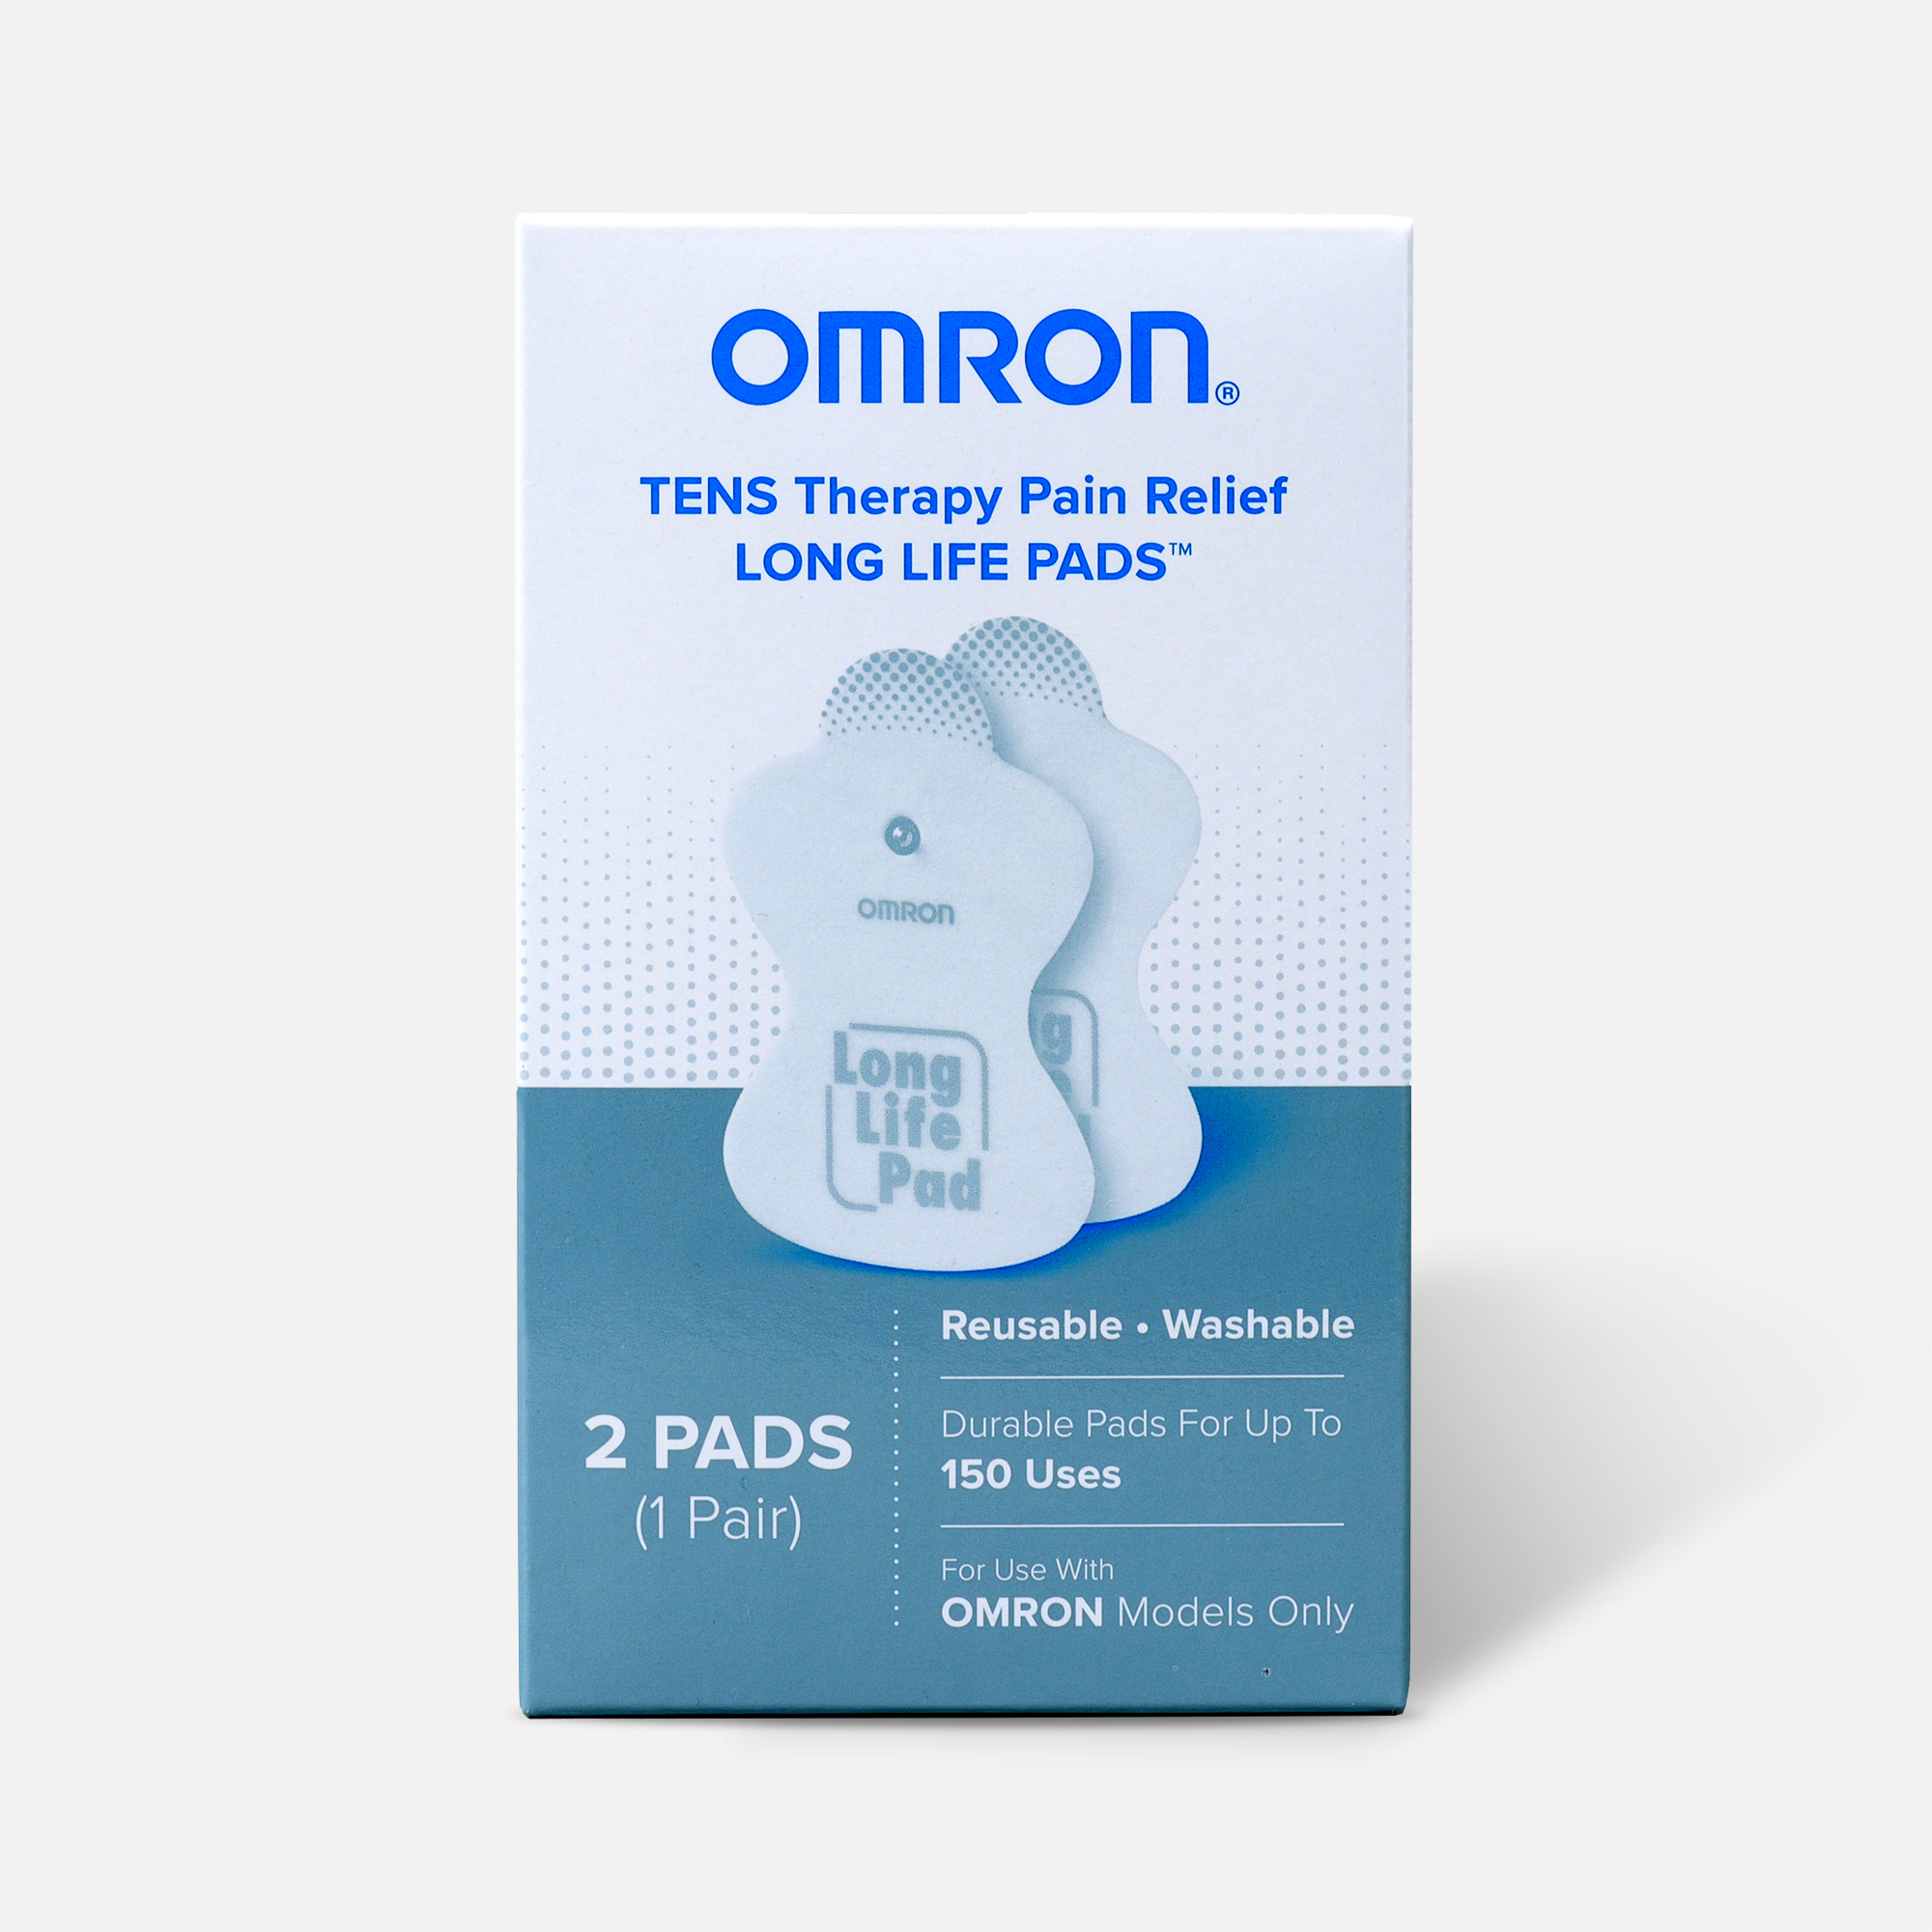 Get started with Omron electroTHERAPY Pain Relief Device PM3030 